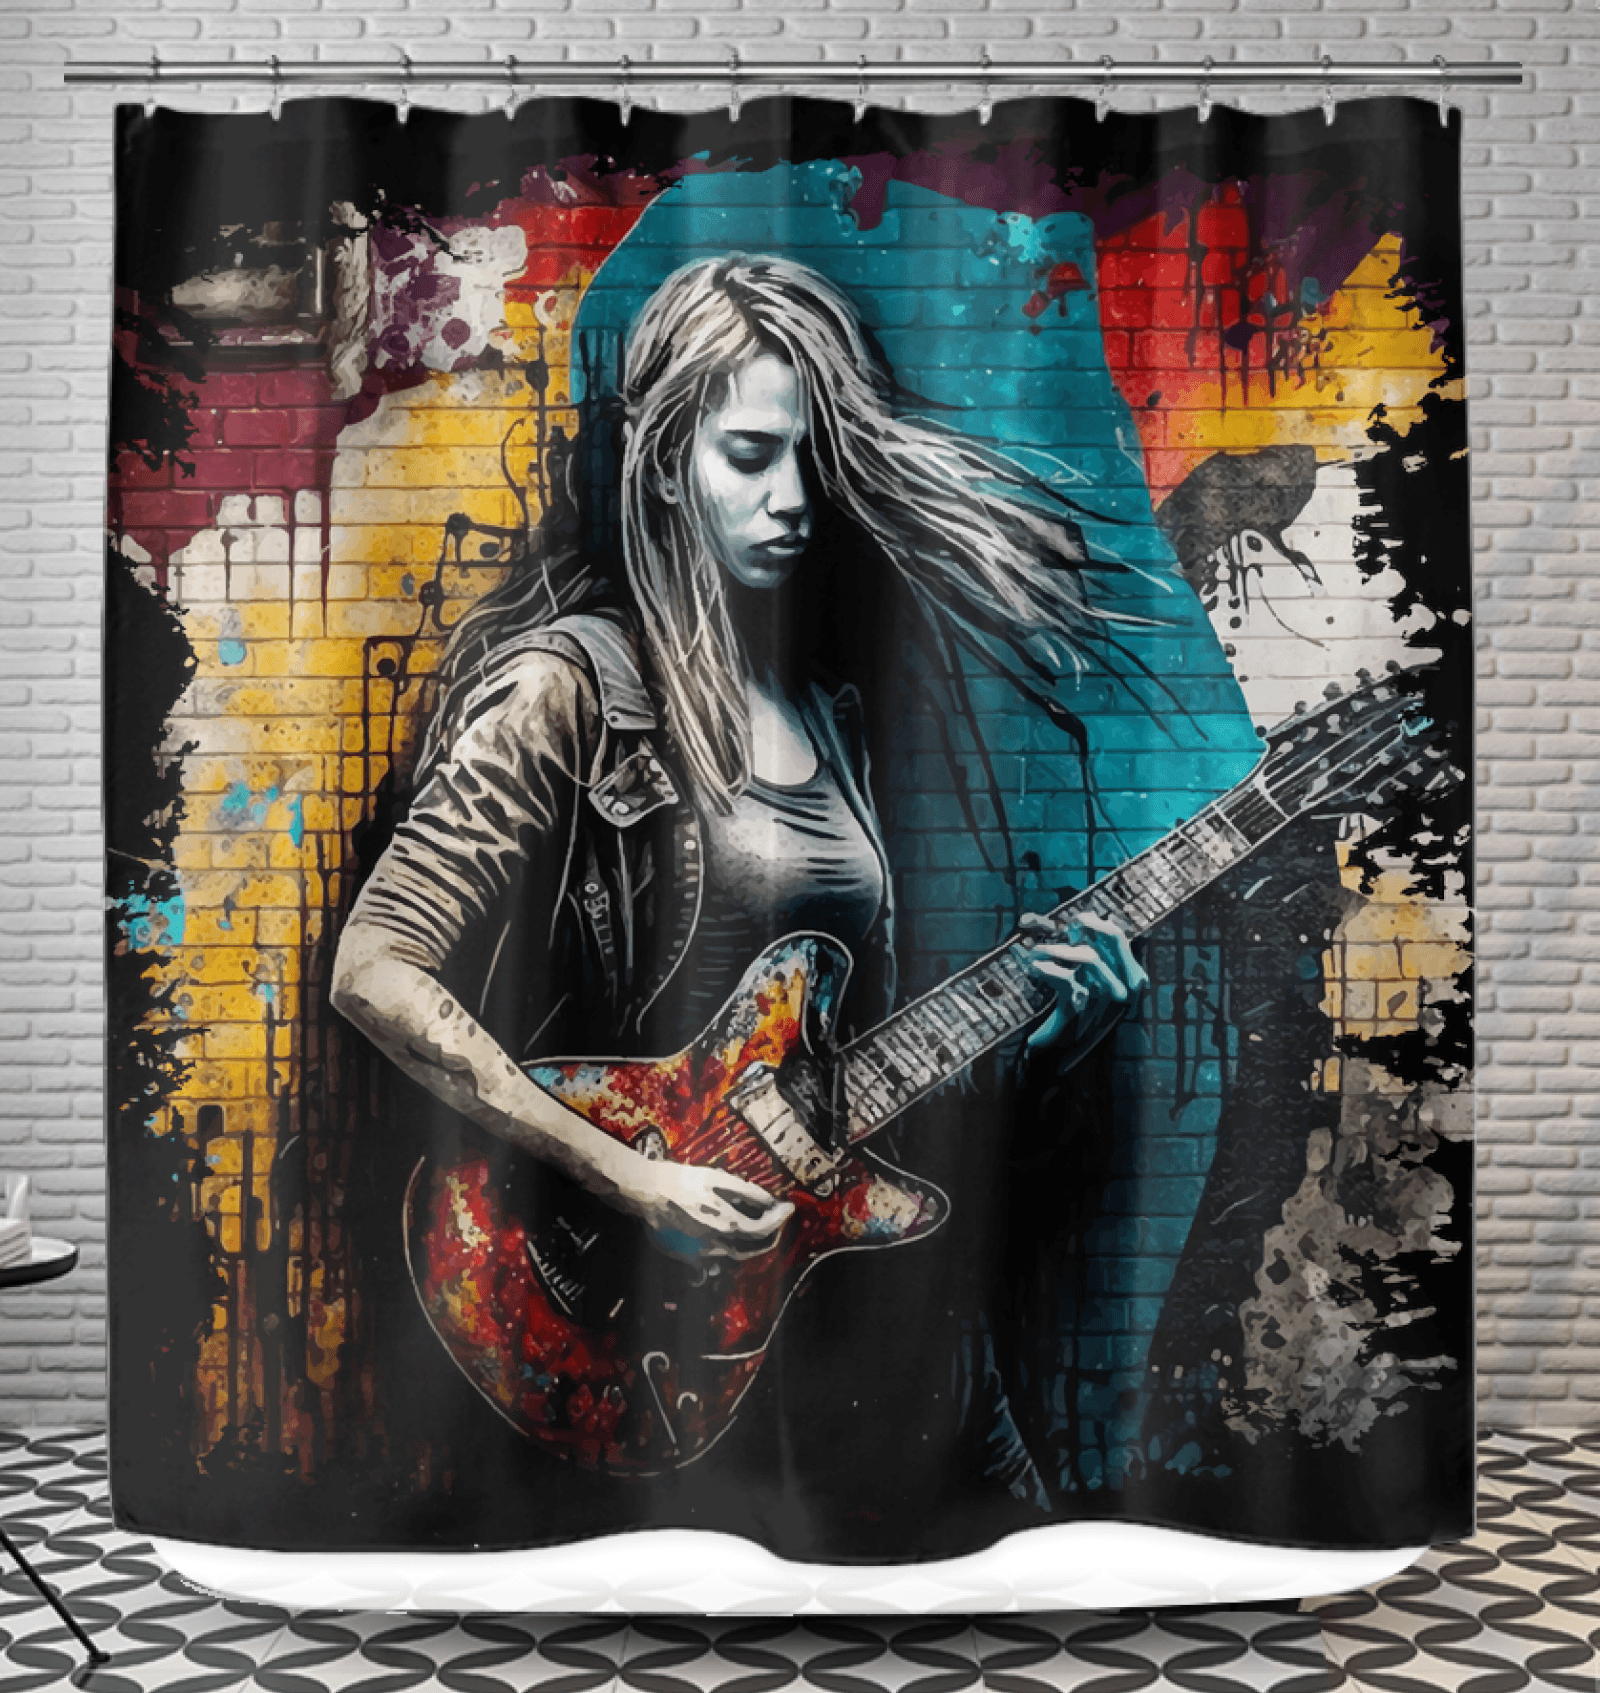 She's Got The Blues Shower Curtain - Beyond T-shirts